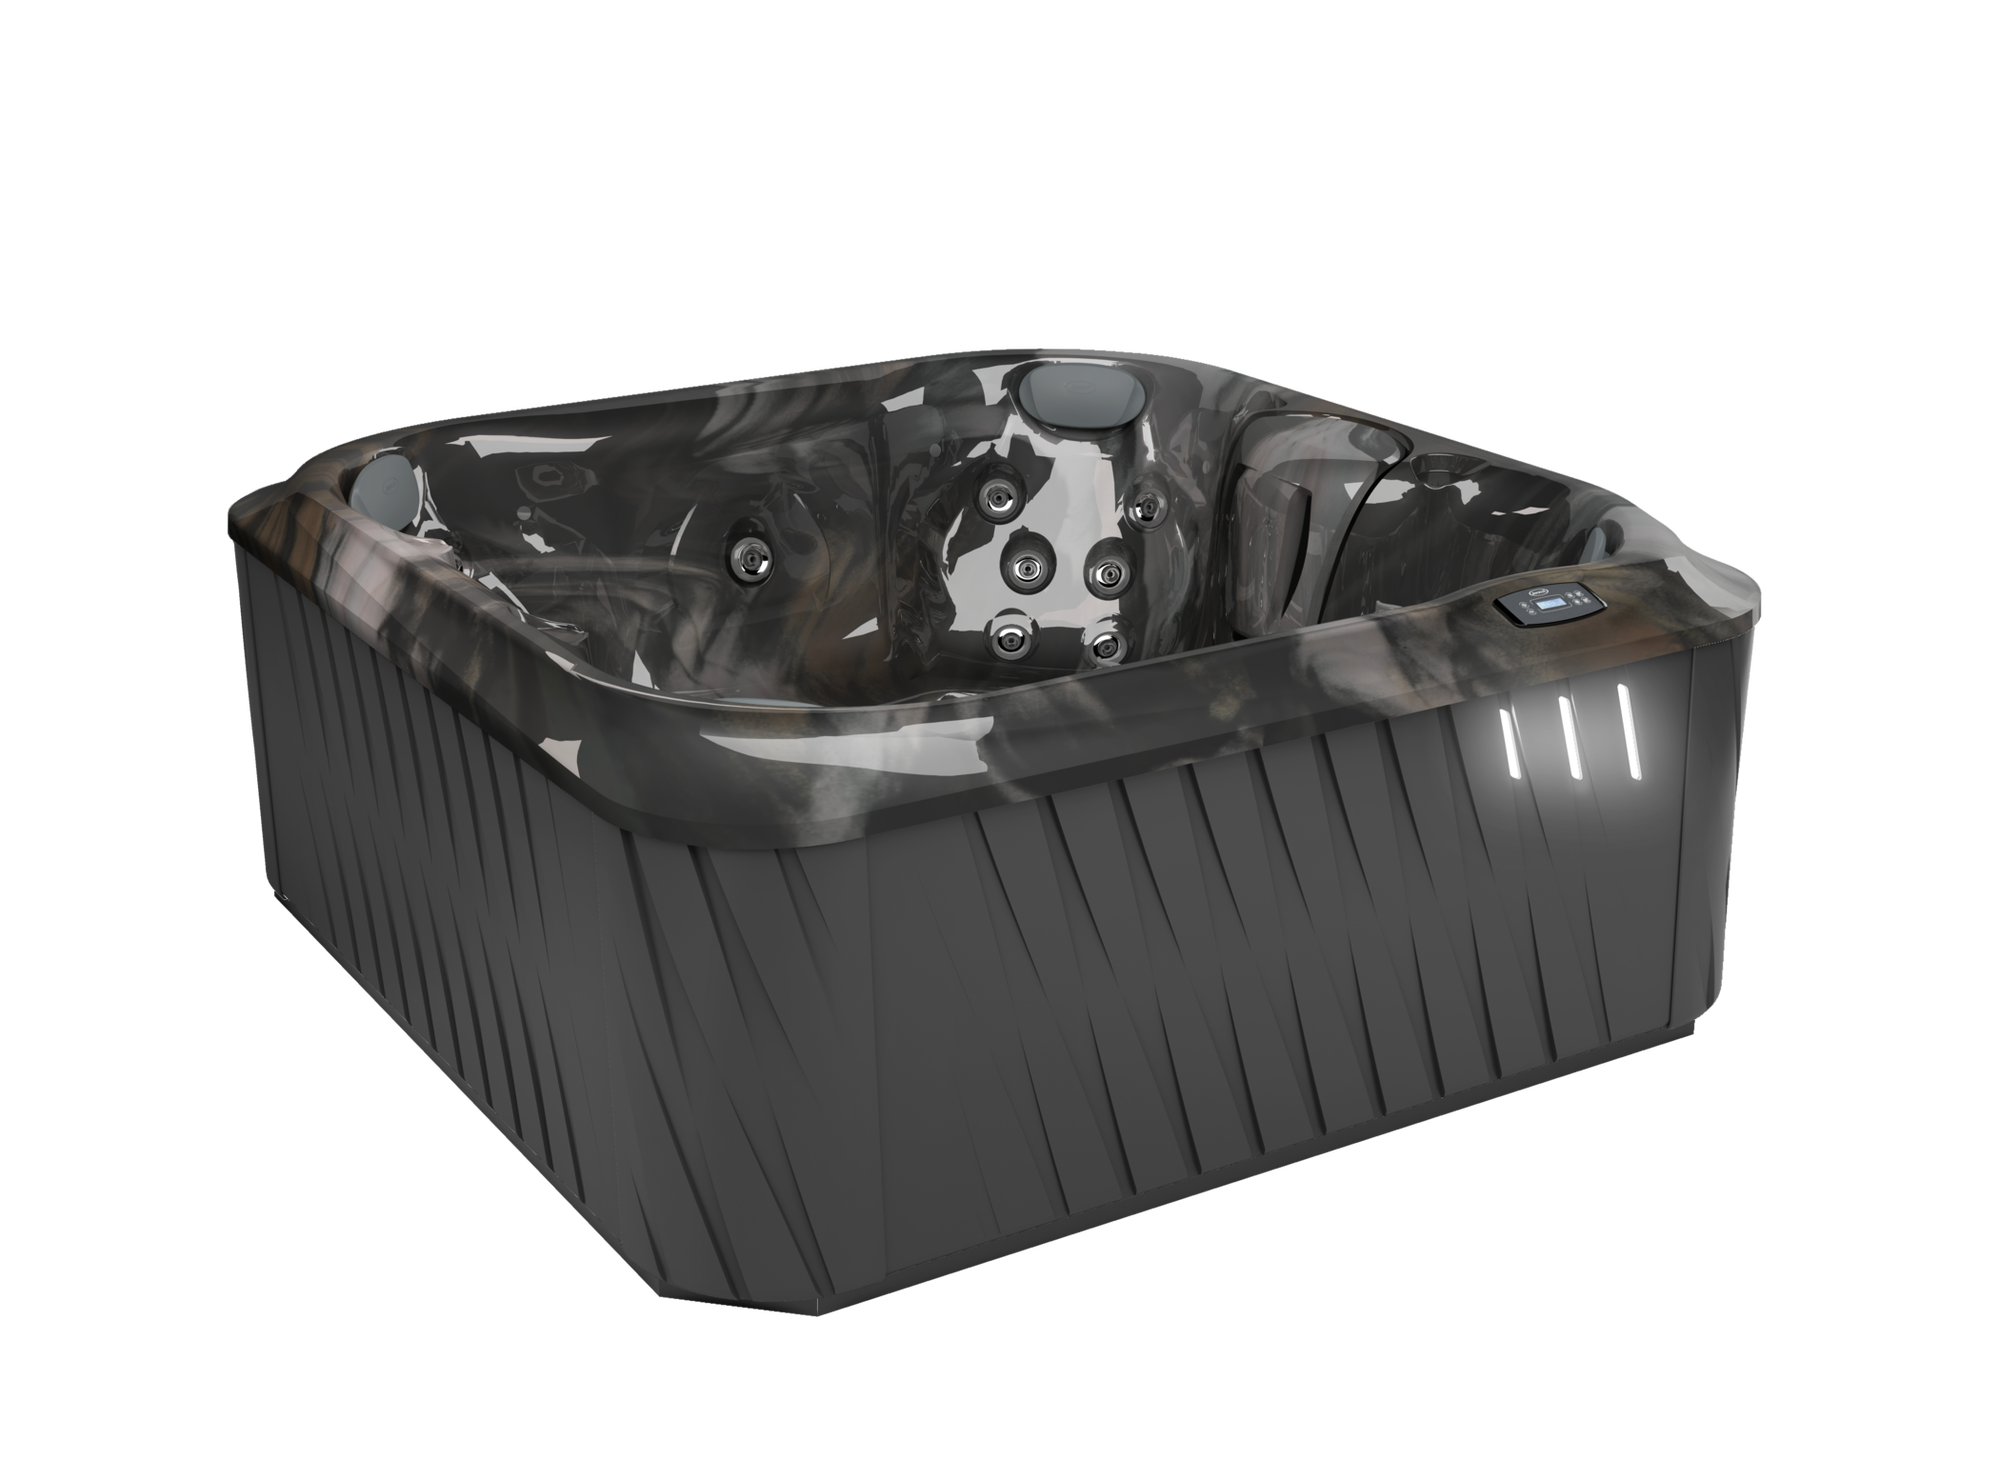 J 225™ Open Seating Hot Tub With Five Seating Options Designer Hot Tub With Open Seating 